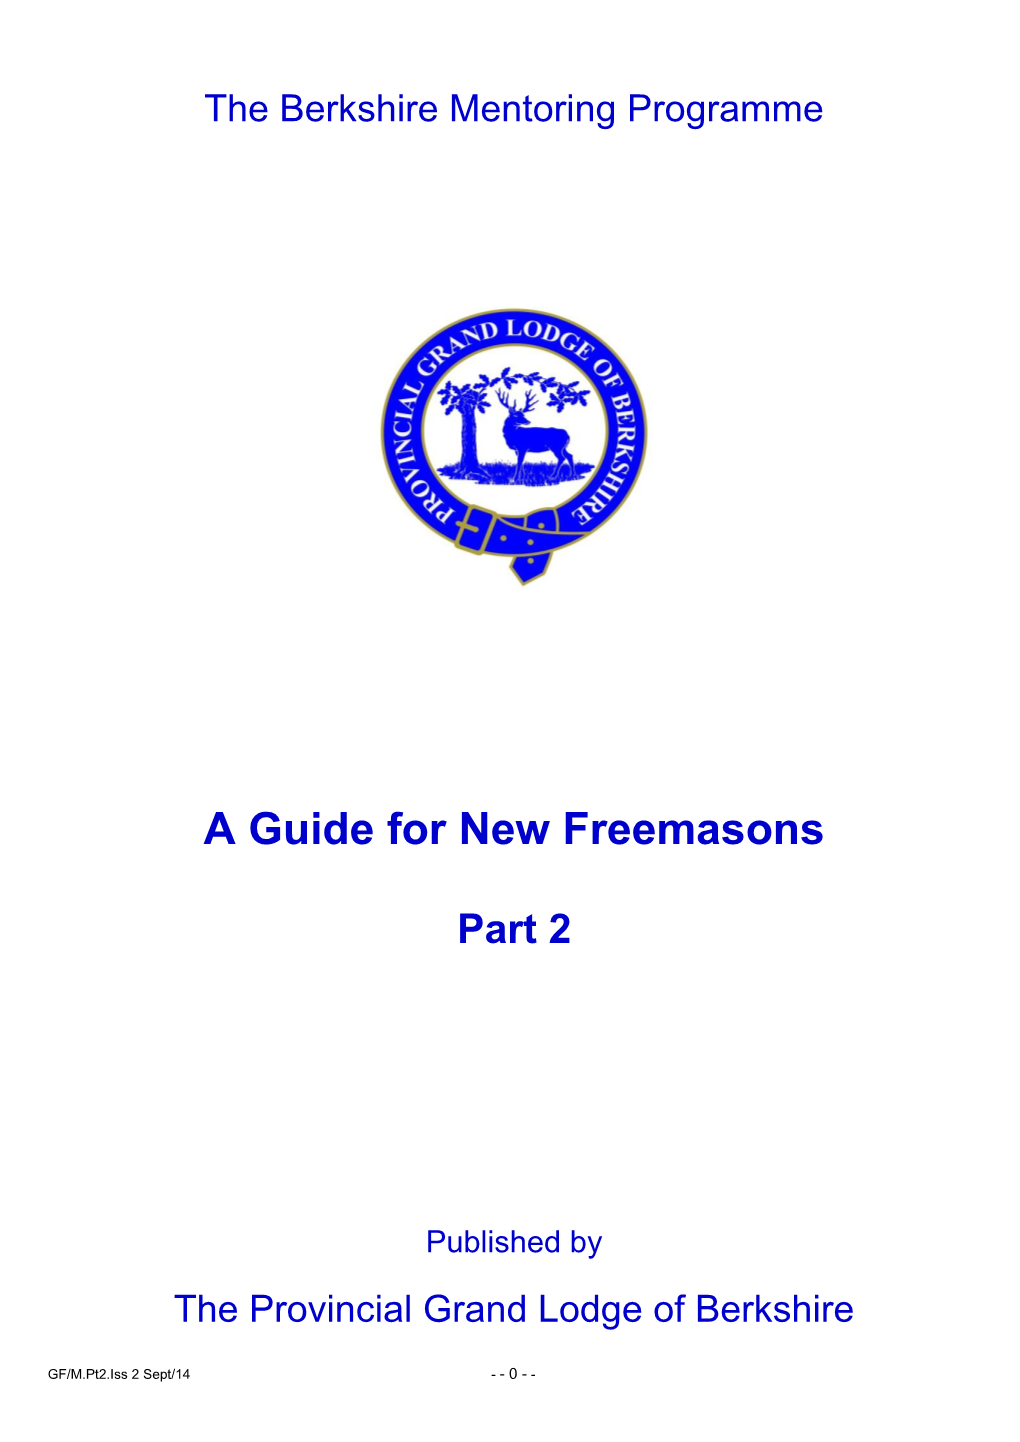 A Guide for New Freemasons